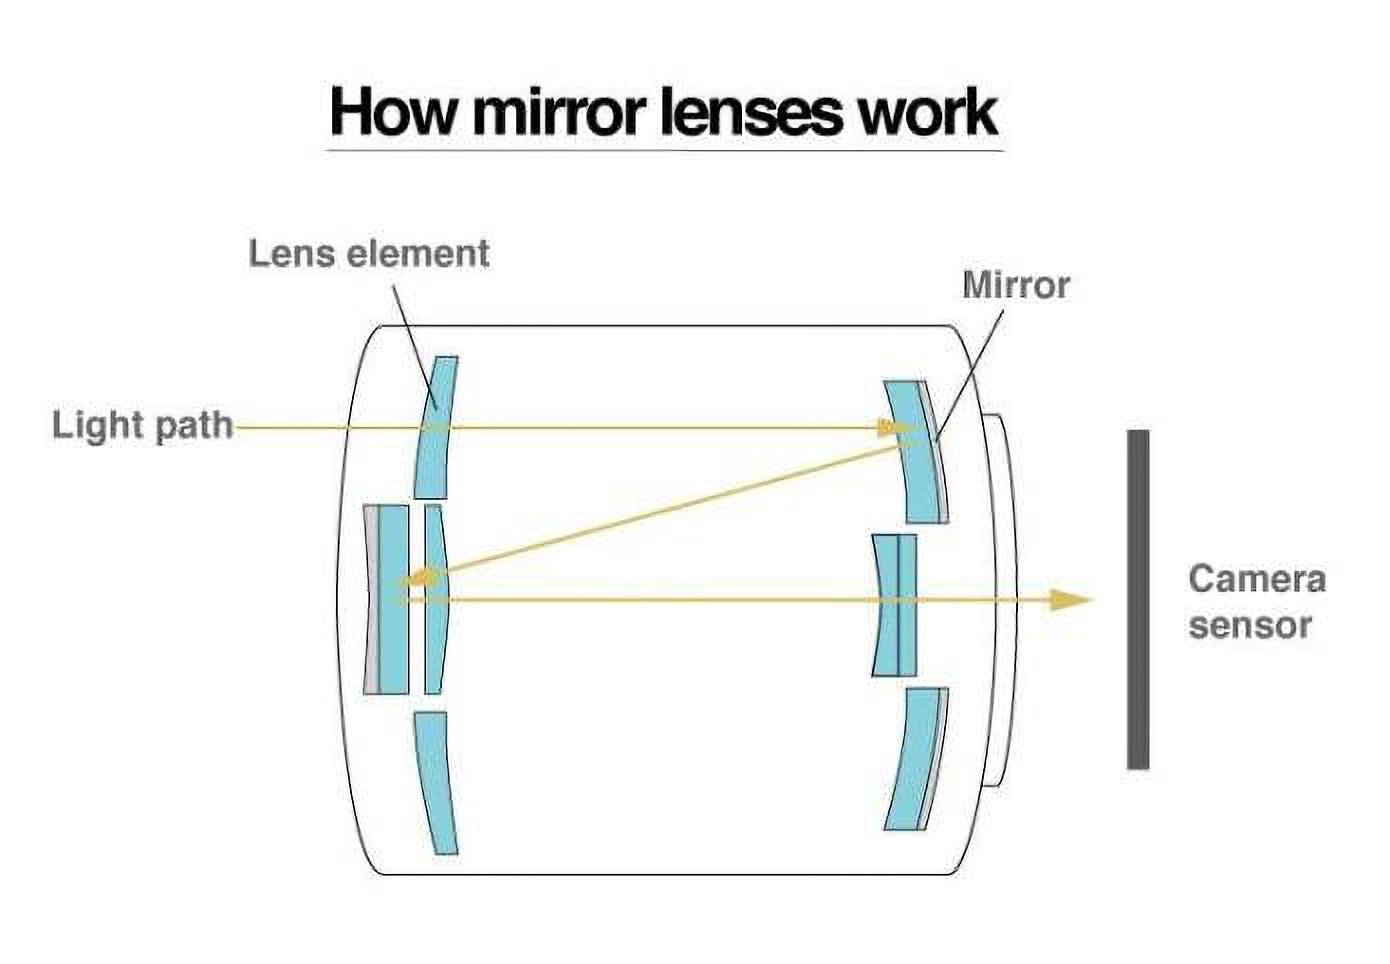 A diagram of how mirror or reflex lenses work.